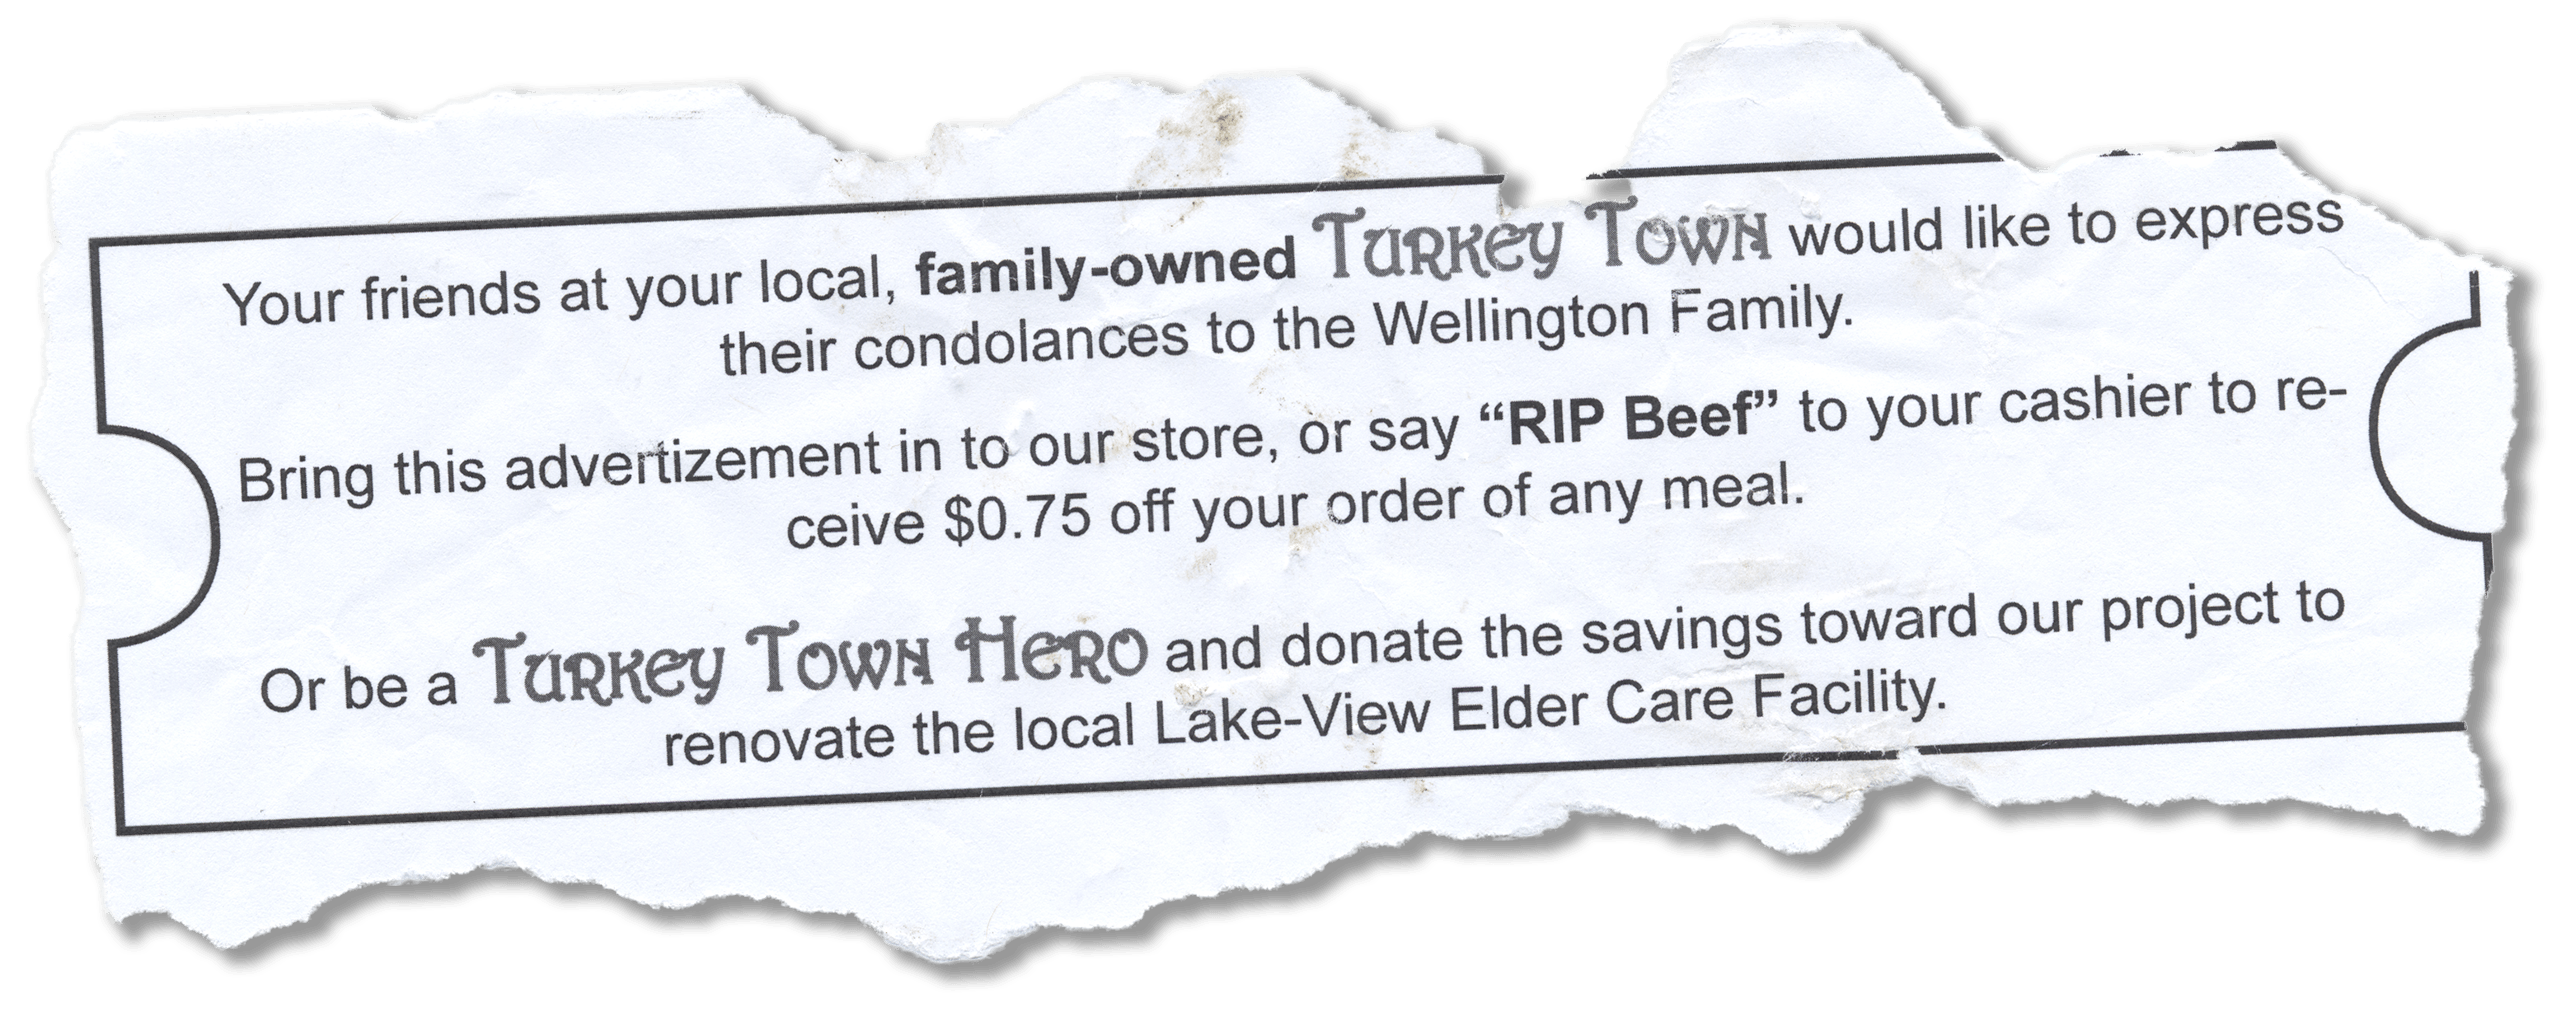 Say RIP Beef for $0.75 off any meal at your local family owned Turkey Town!